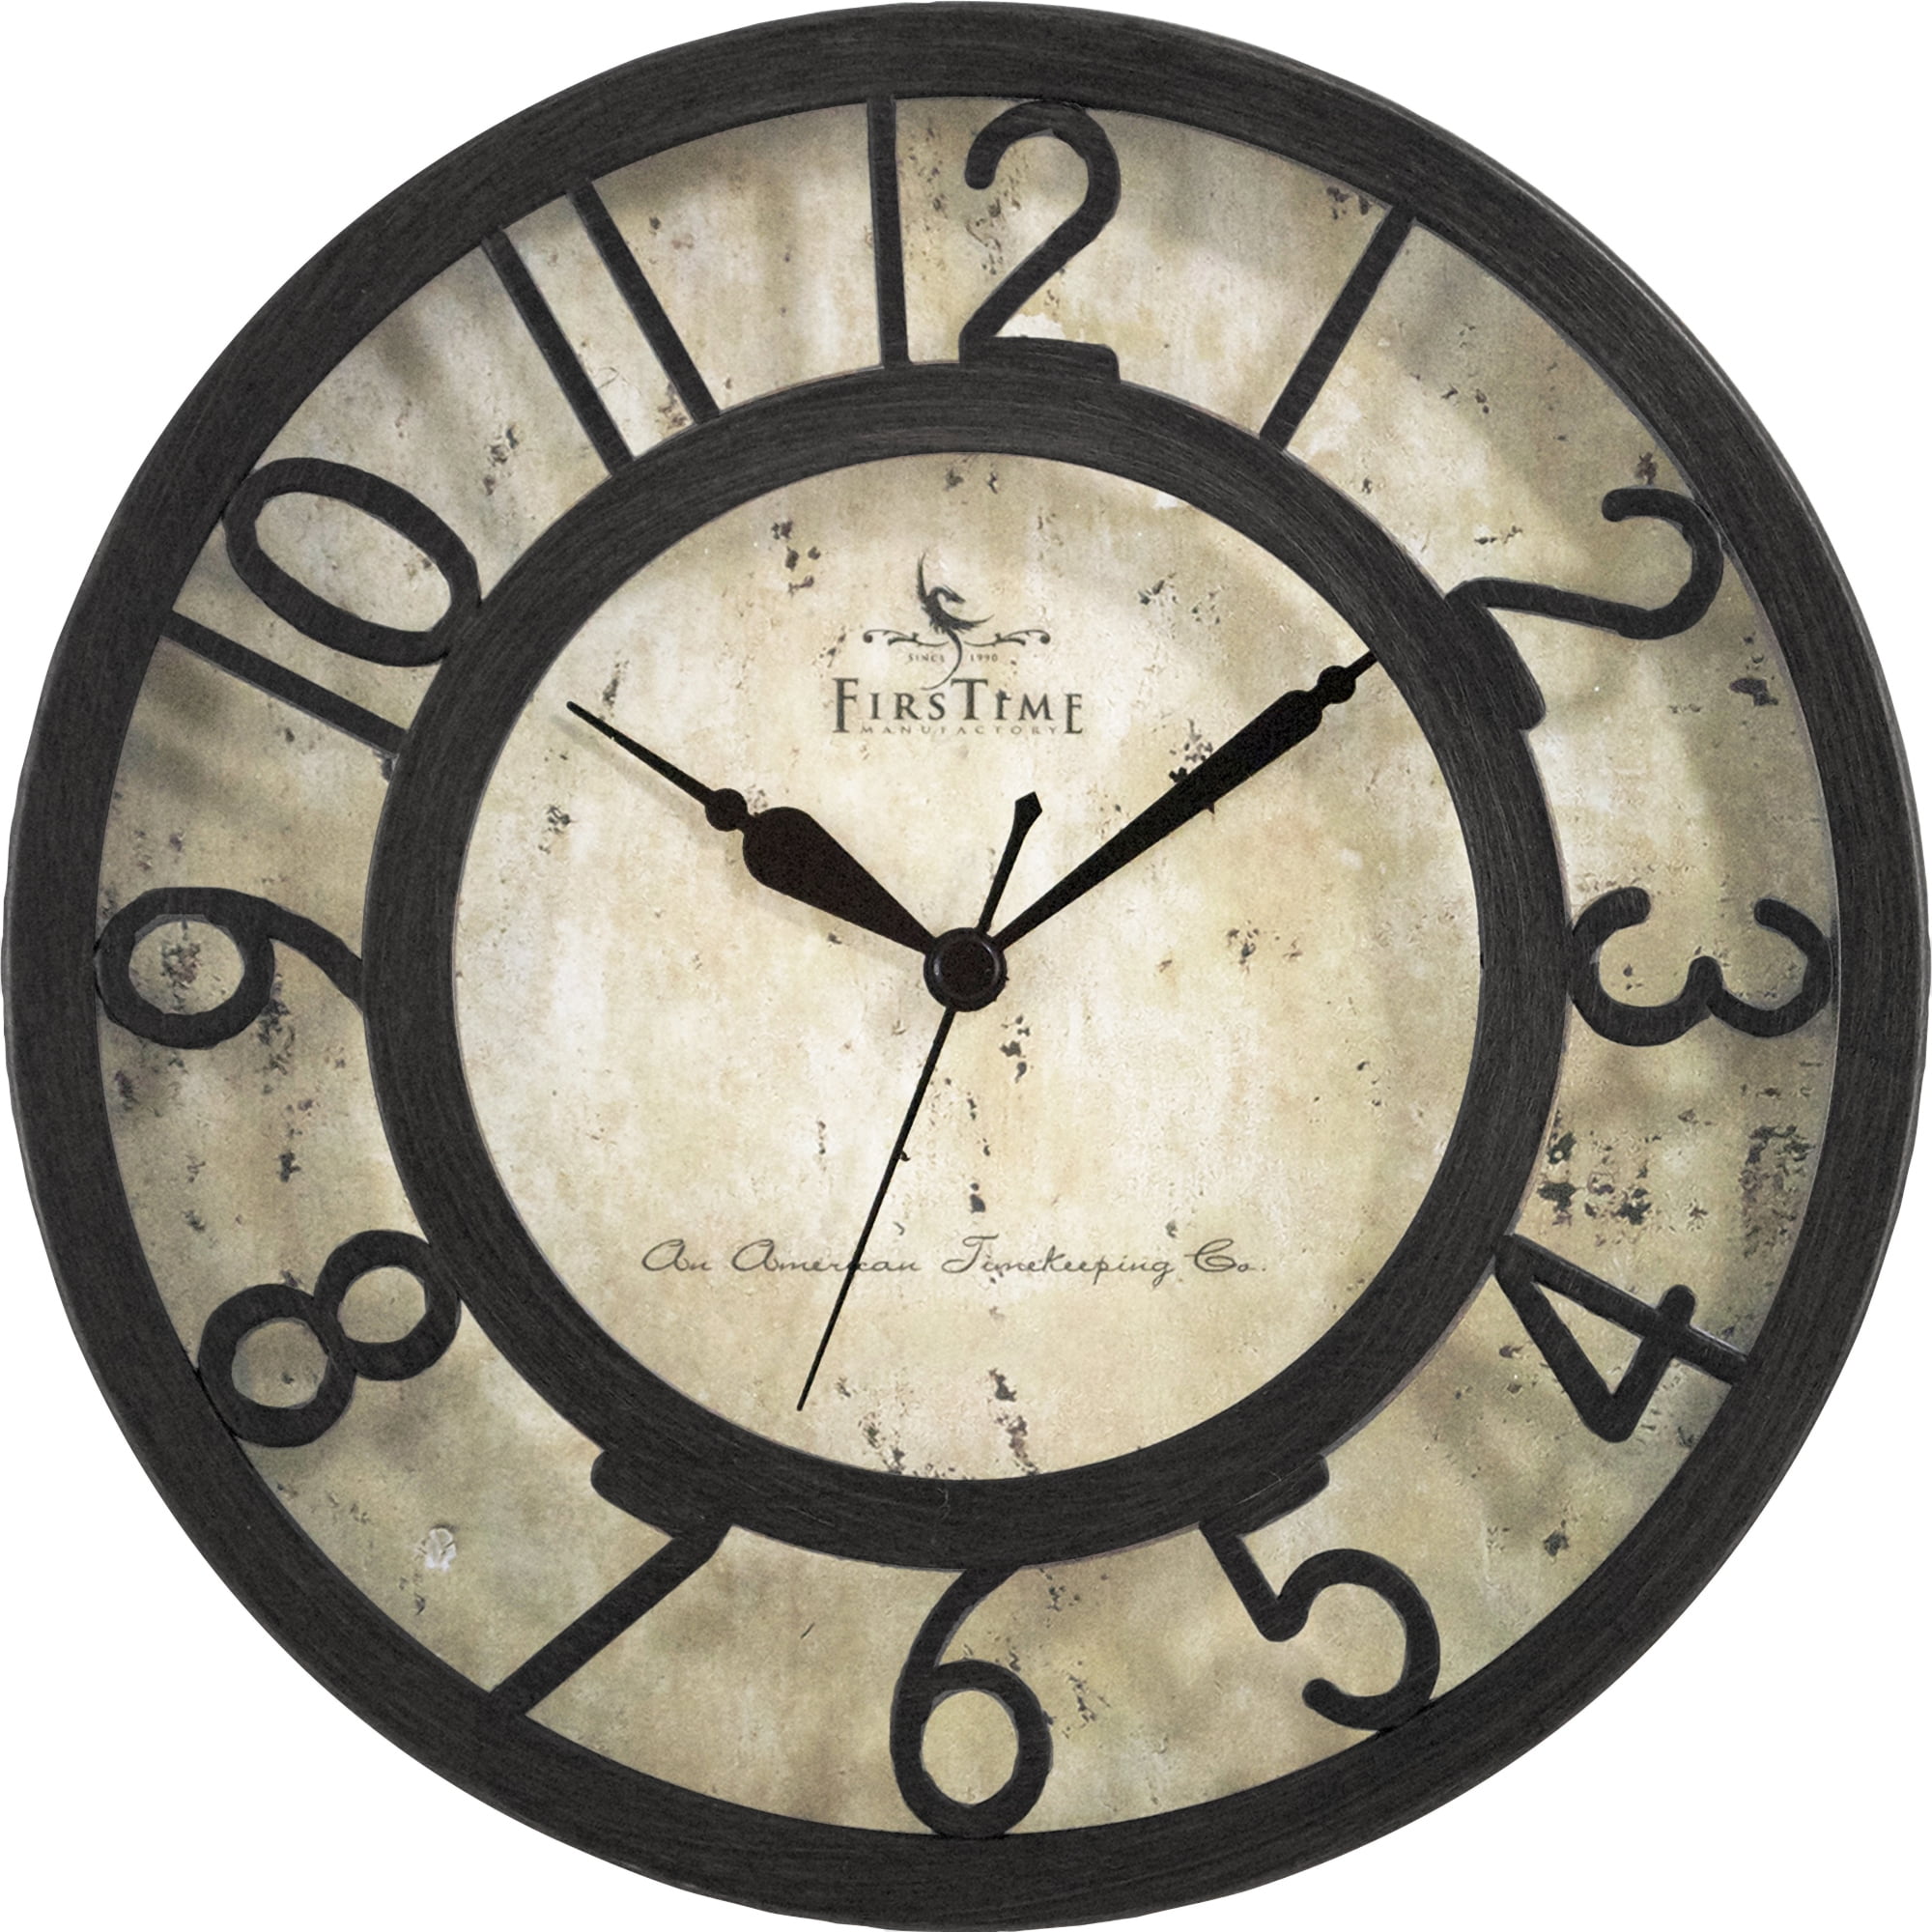 8 x 2 x 8 Oil Rubbed Bronze American Crafted Raised Number Wall Clock